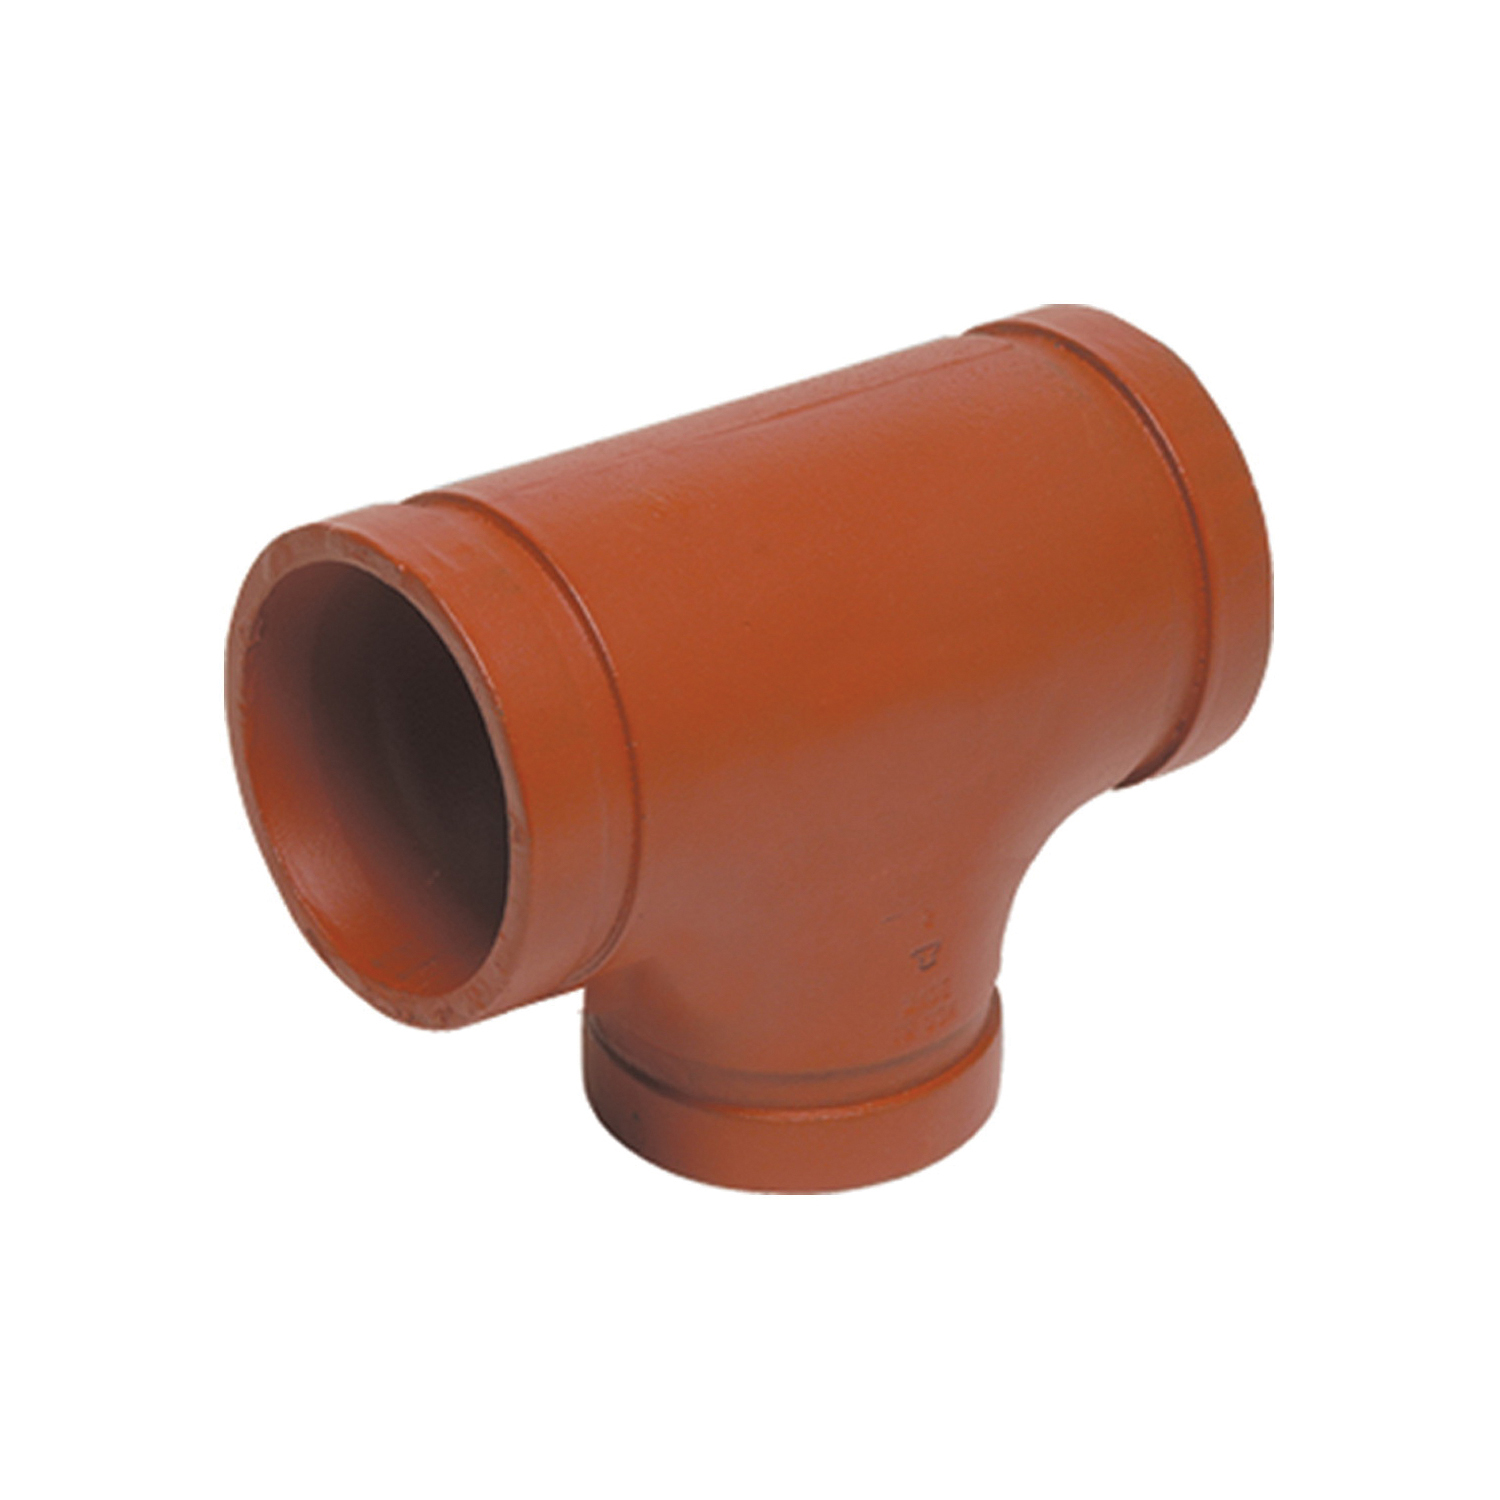 Gruvlok® 0390017408 FIG 7061 Pipe Reducing Tee, 4x4x2 in, Grooved, Ductile Iron, Rust Inhibiting Paint, Domestic